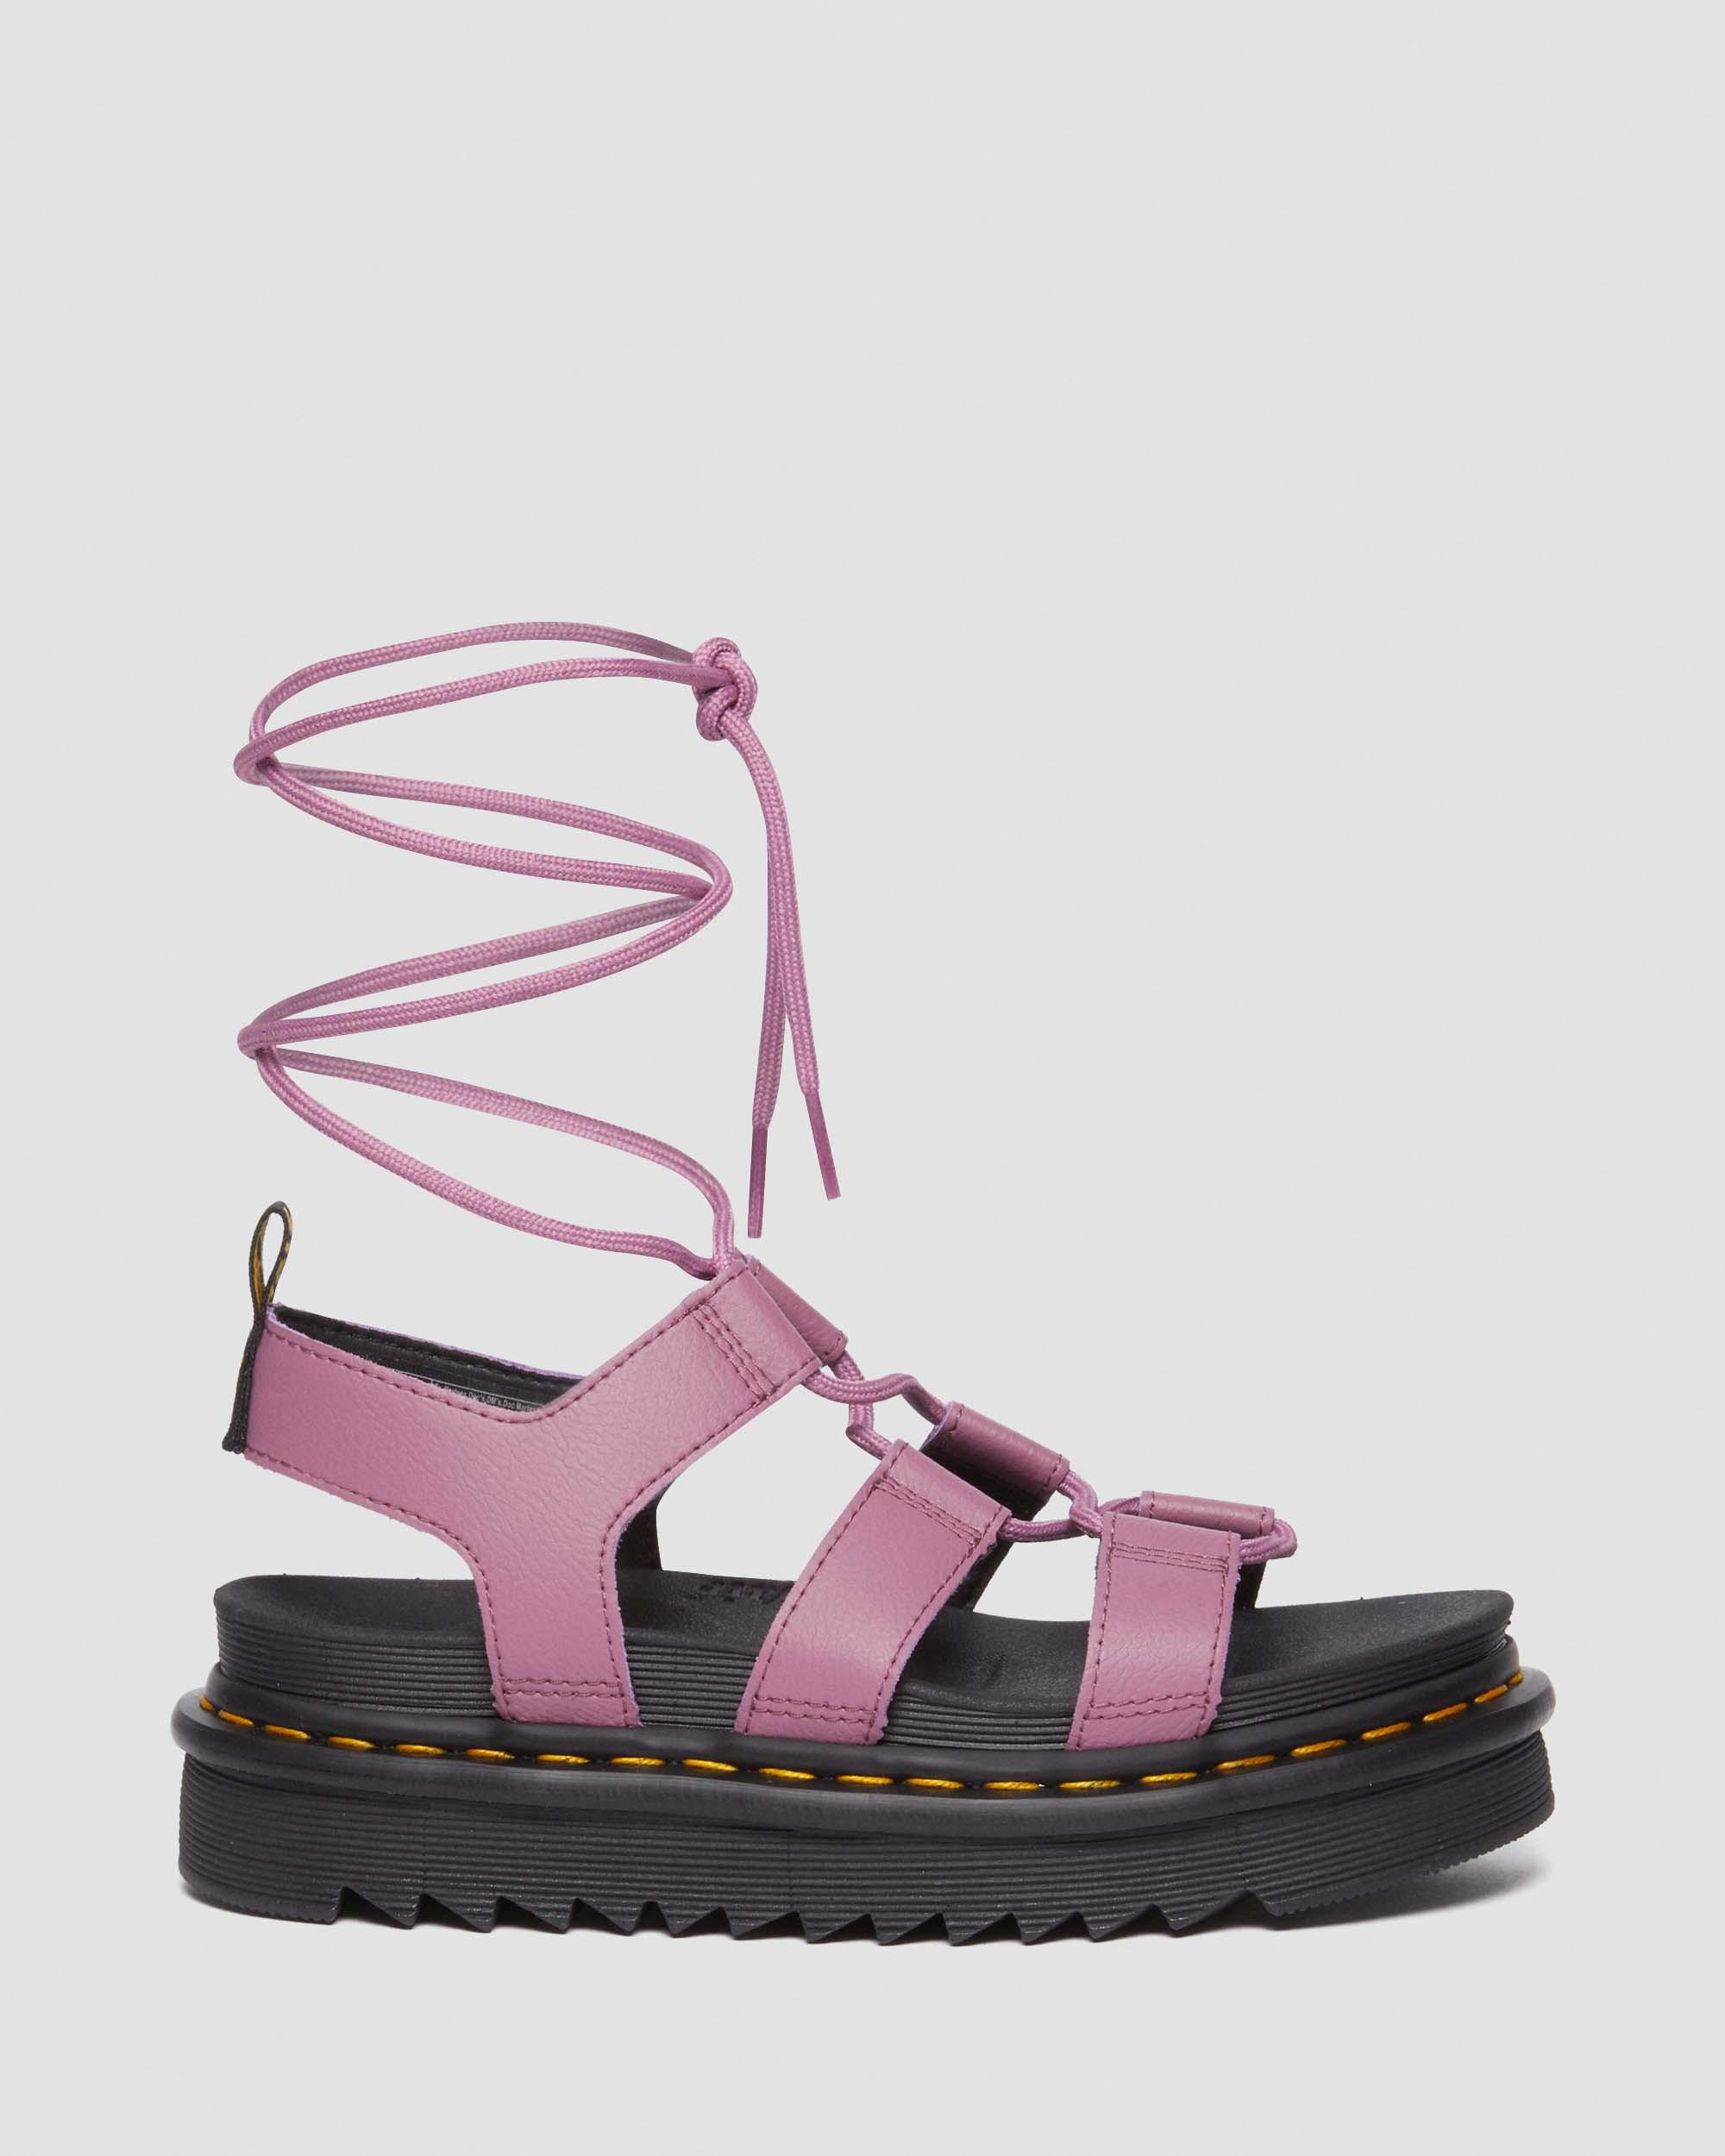 Nartilla Leather Gladiator Sandals in Muted Purple